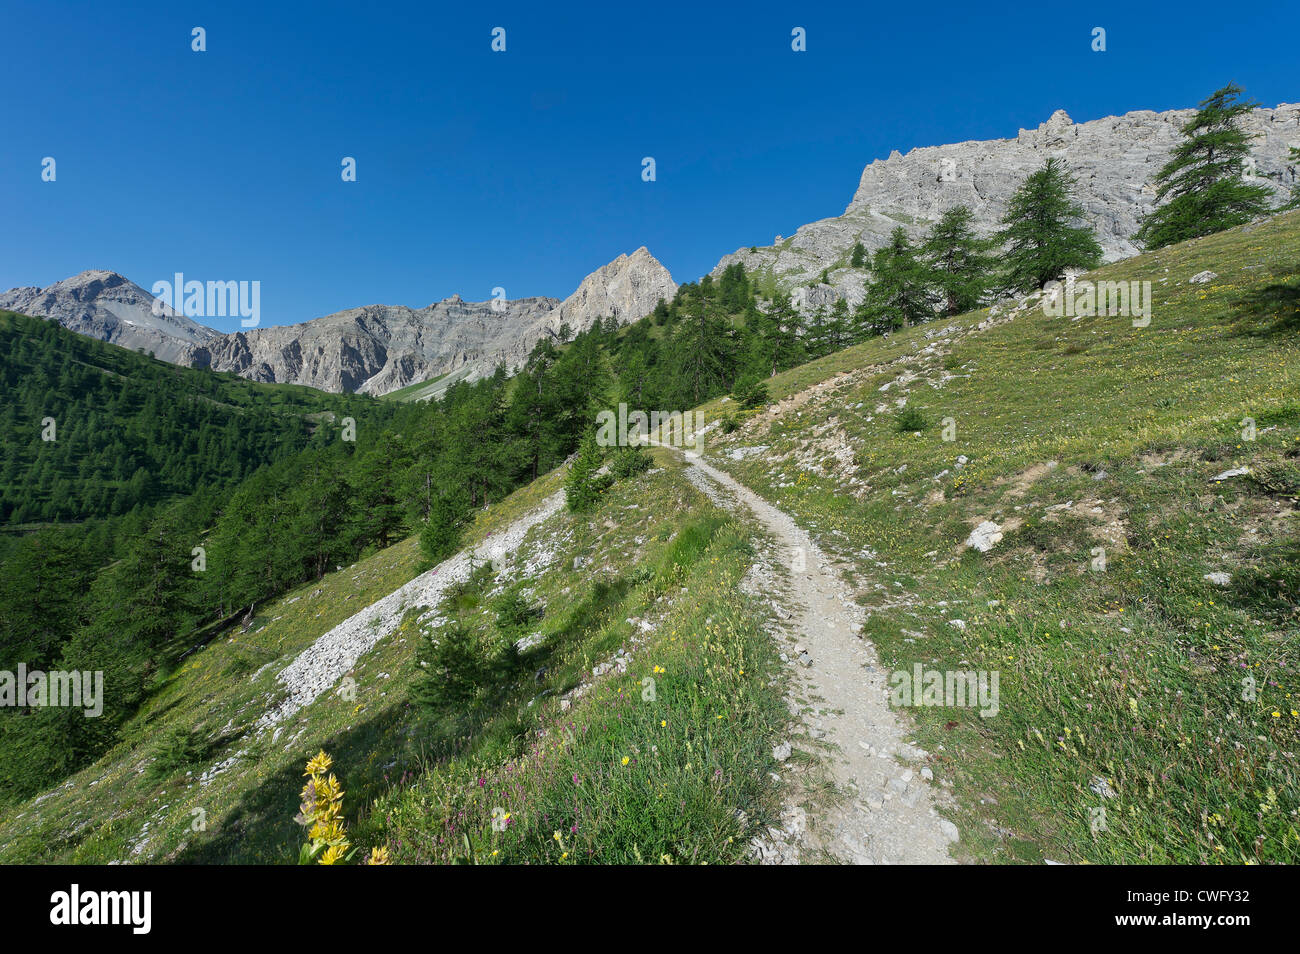 France, Doubs, Alaise, forest, site to Chatelaillon, La Gauloise Trail,  Gallic vestiges, rock shelter Stock Photo - Alamy